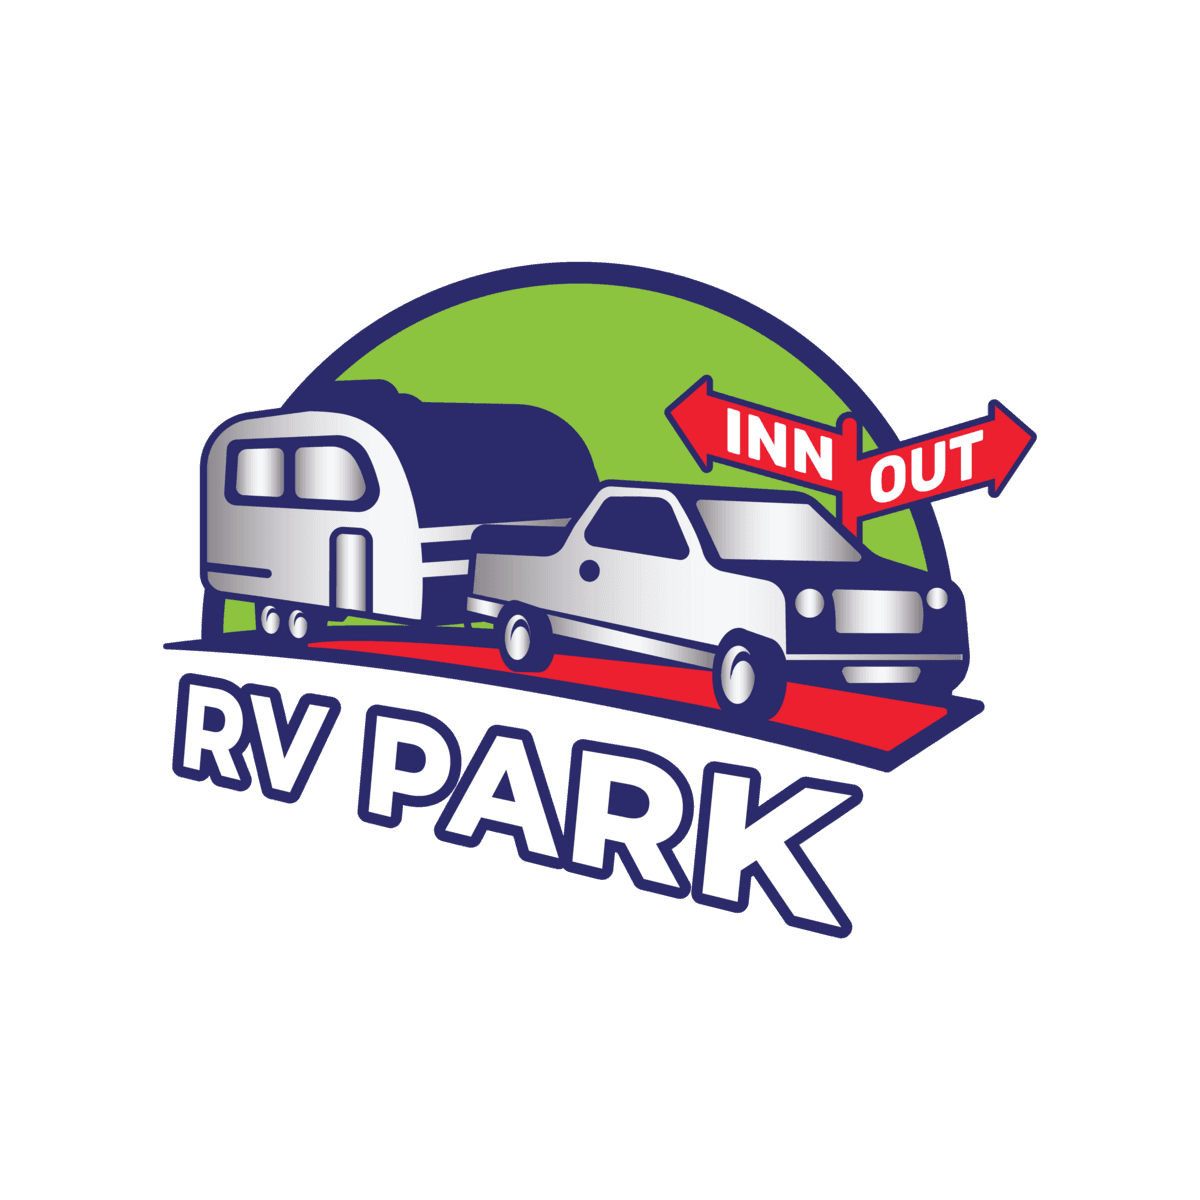 Inn and Out RV Park